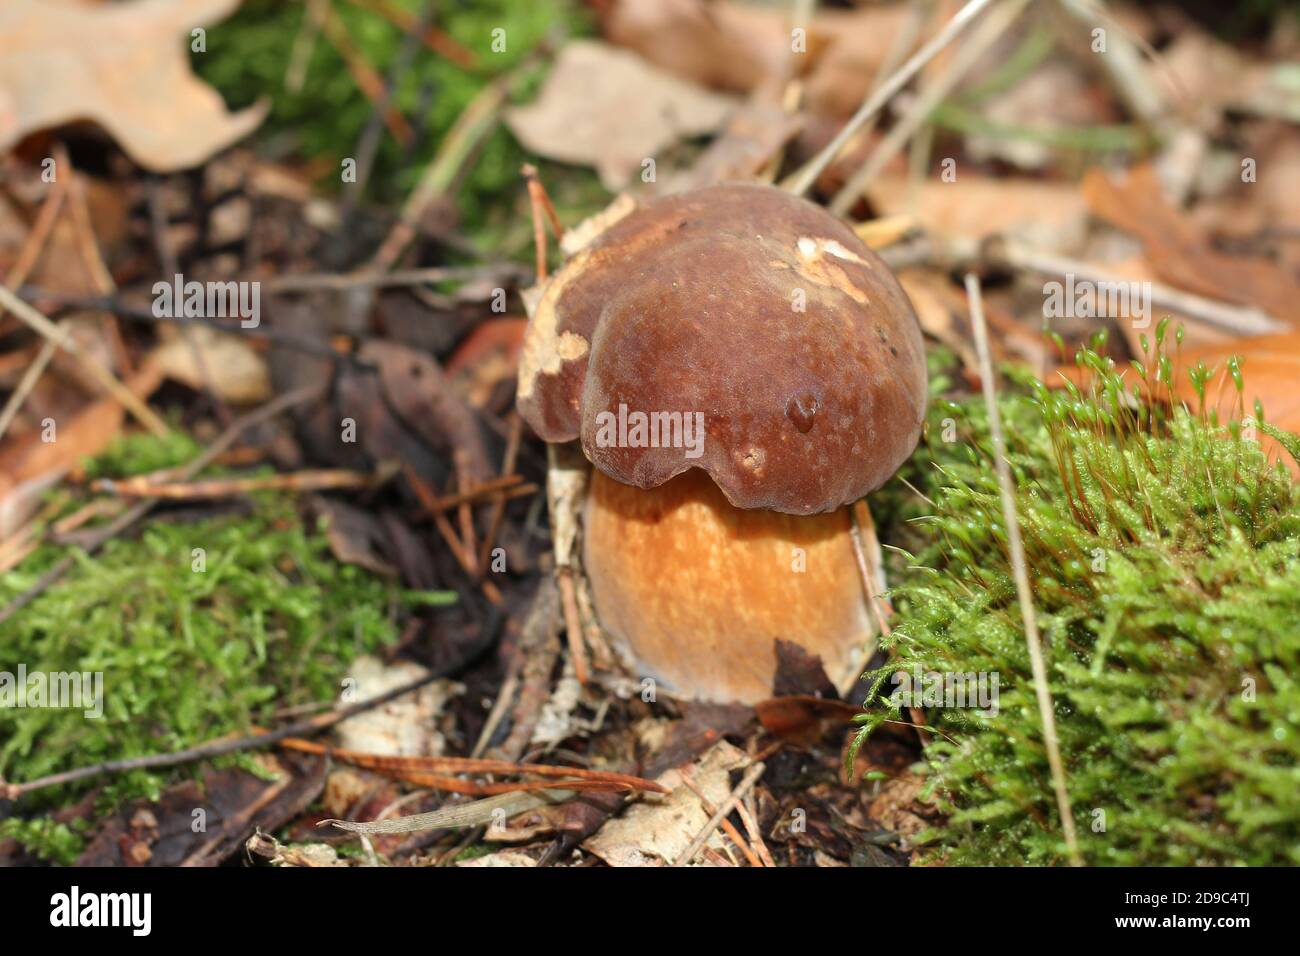 Penny Bun, Boletus pinophilus, growing in a pine forest near Haltern, Germany Stock Photo